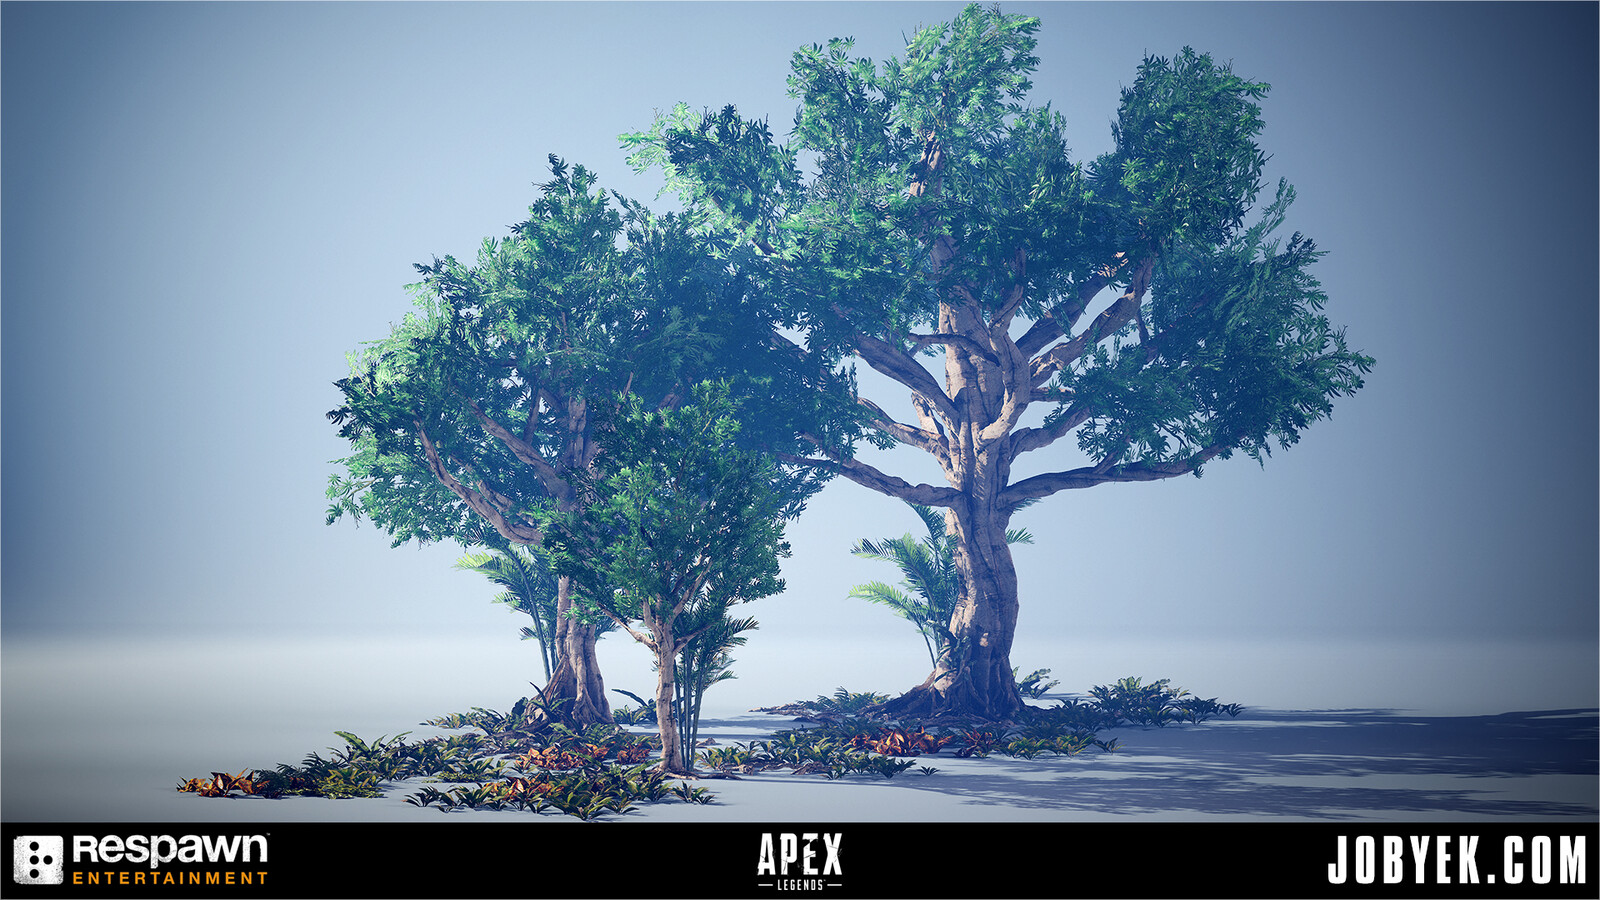 The Jungle Style assets and textures I modelled and textured (clovers, orange plants and roots are re-textured or re-skinned existing assets).